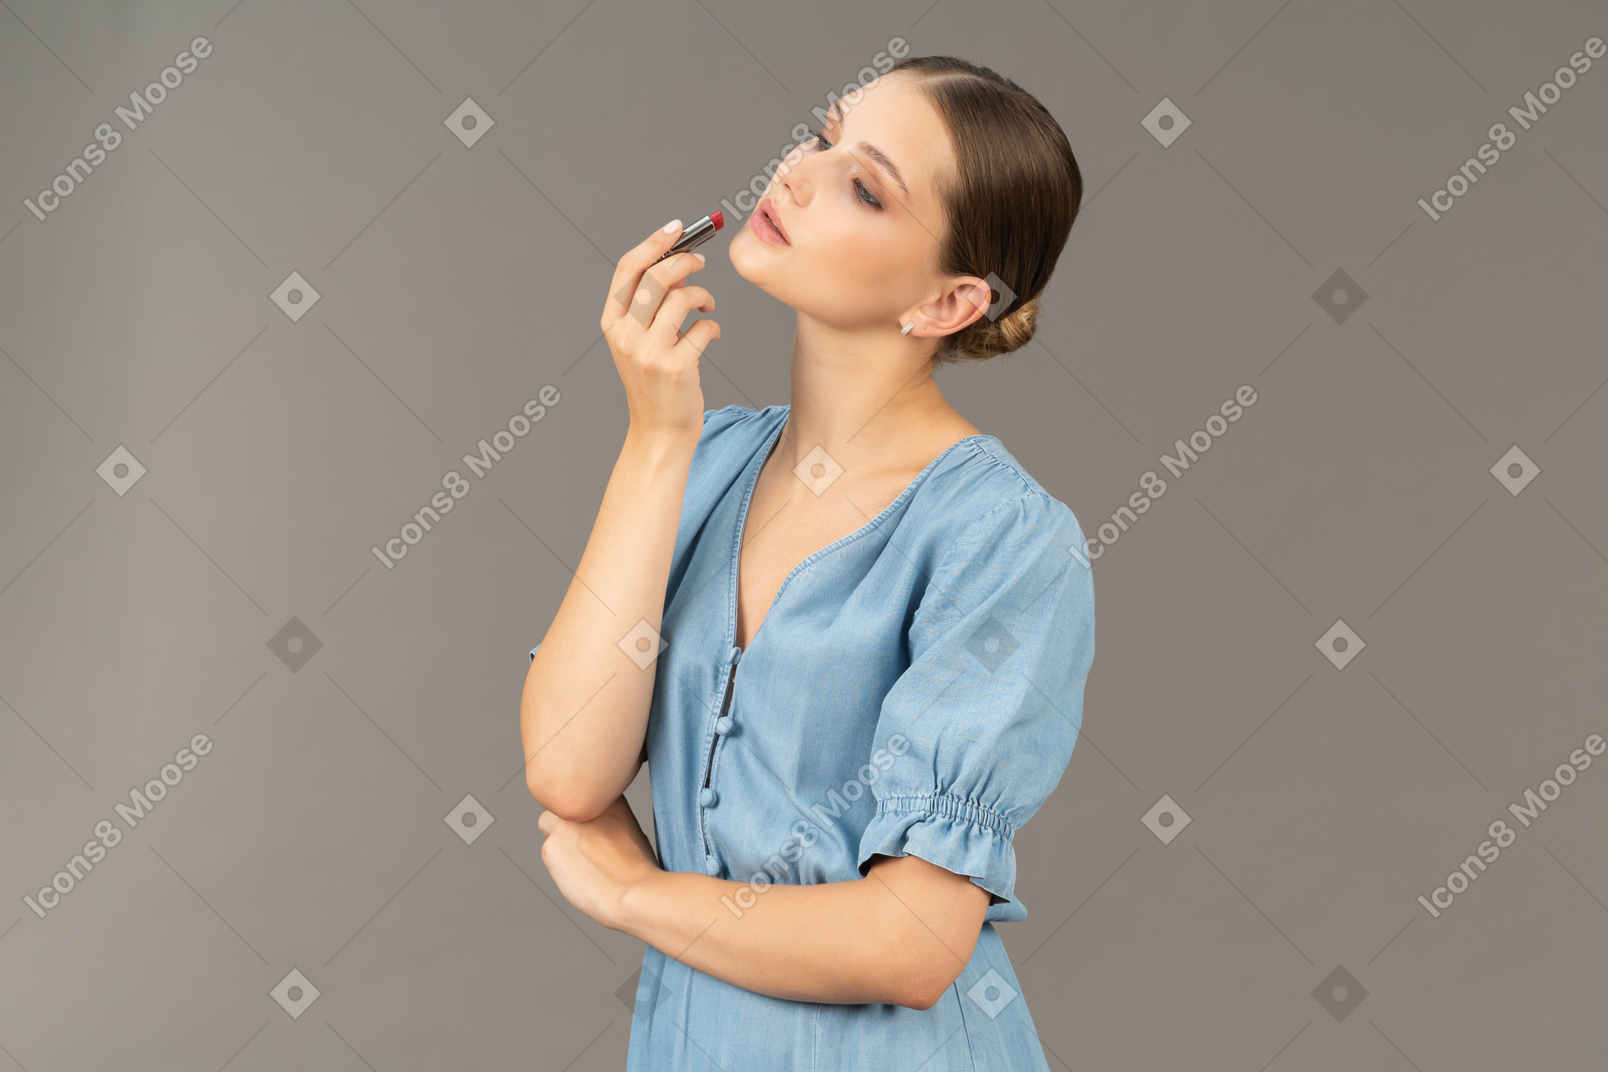 Three-quarter view of a young woman in blue dress holding a lipstick